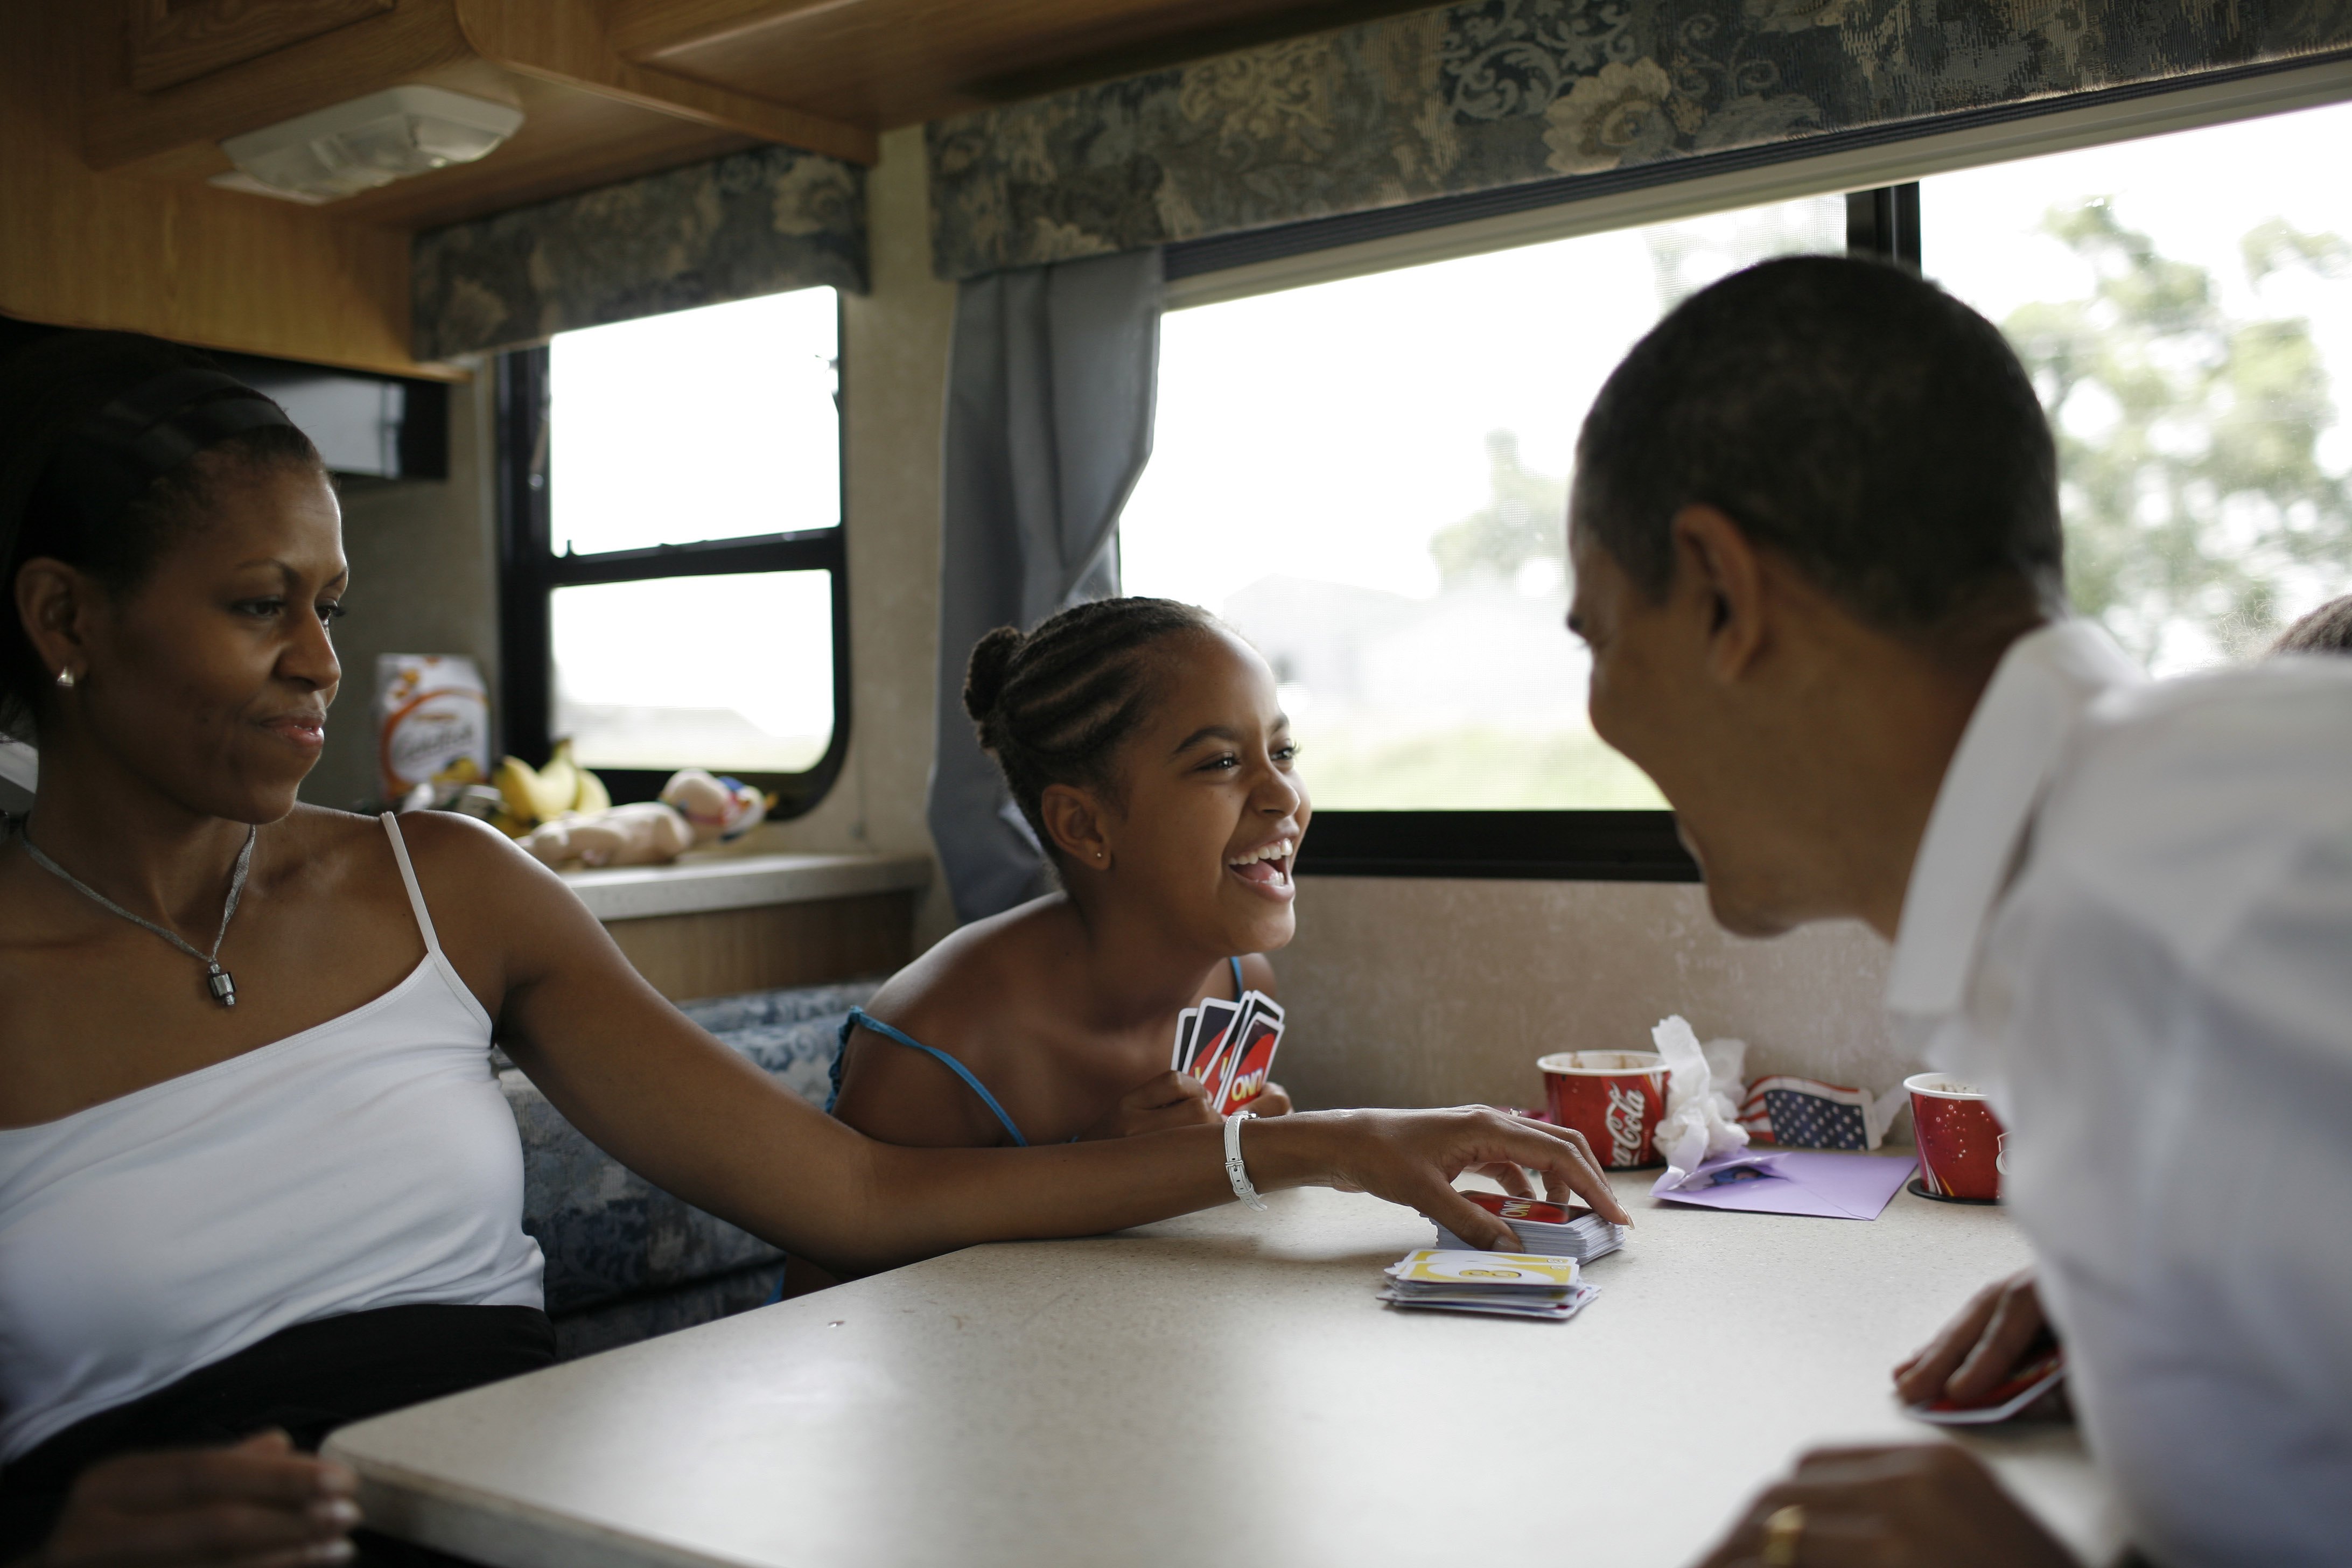 Michelle, Malia, Sasha (not pictured) and Barack Obama playing cards in their RV  while on a campaign swing between Oskaloosa and Pella, Iowa on July 4, 2007. | Source: Getty Images